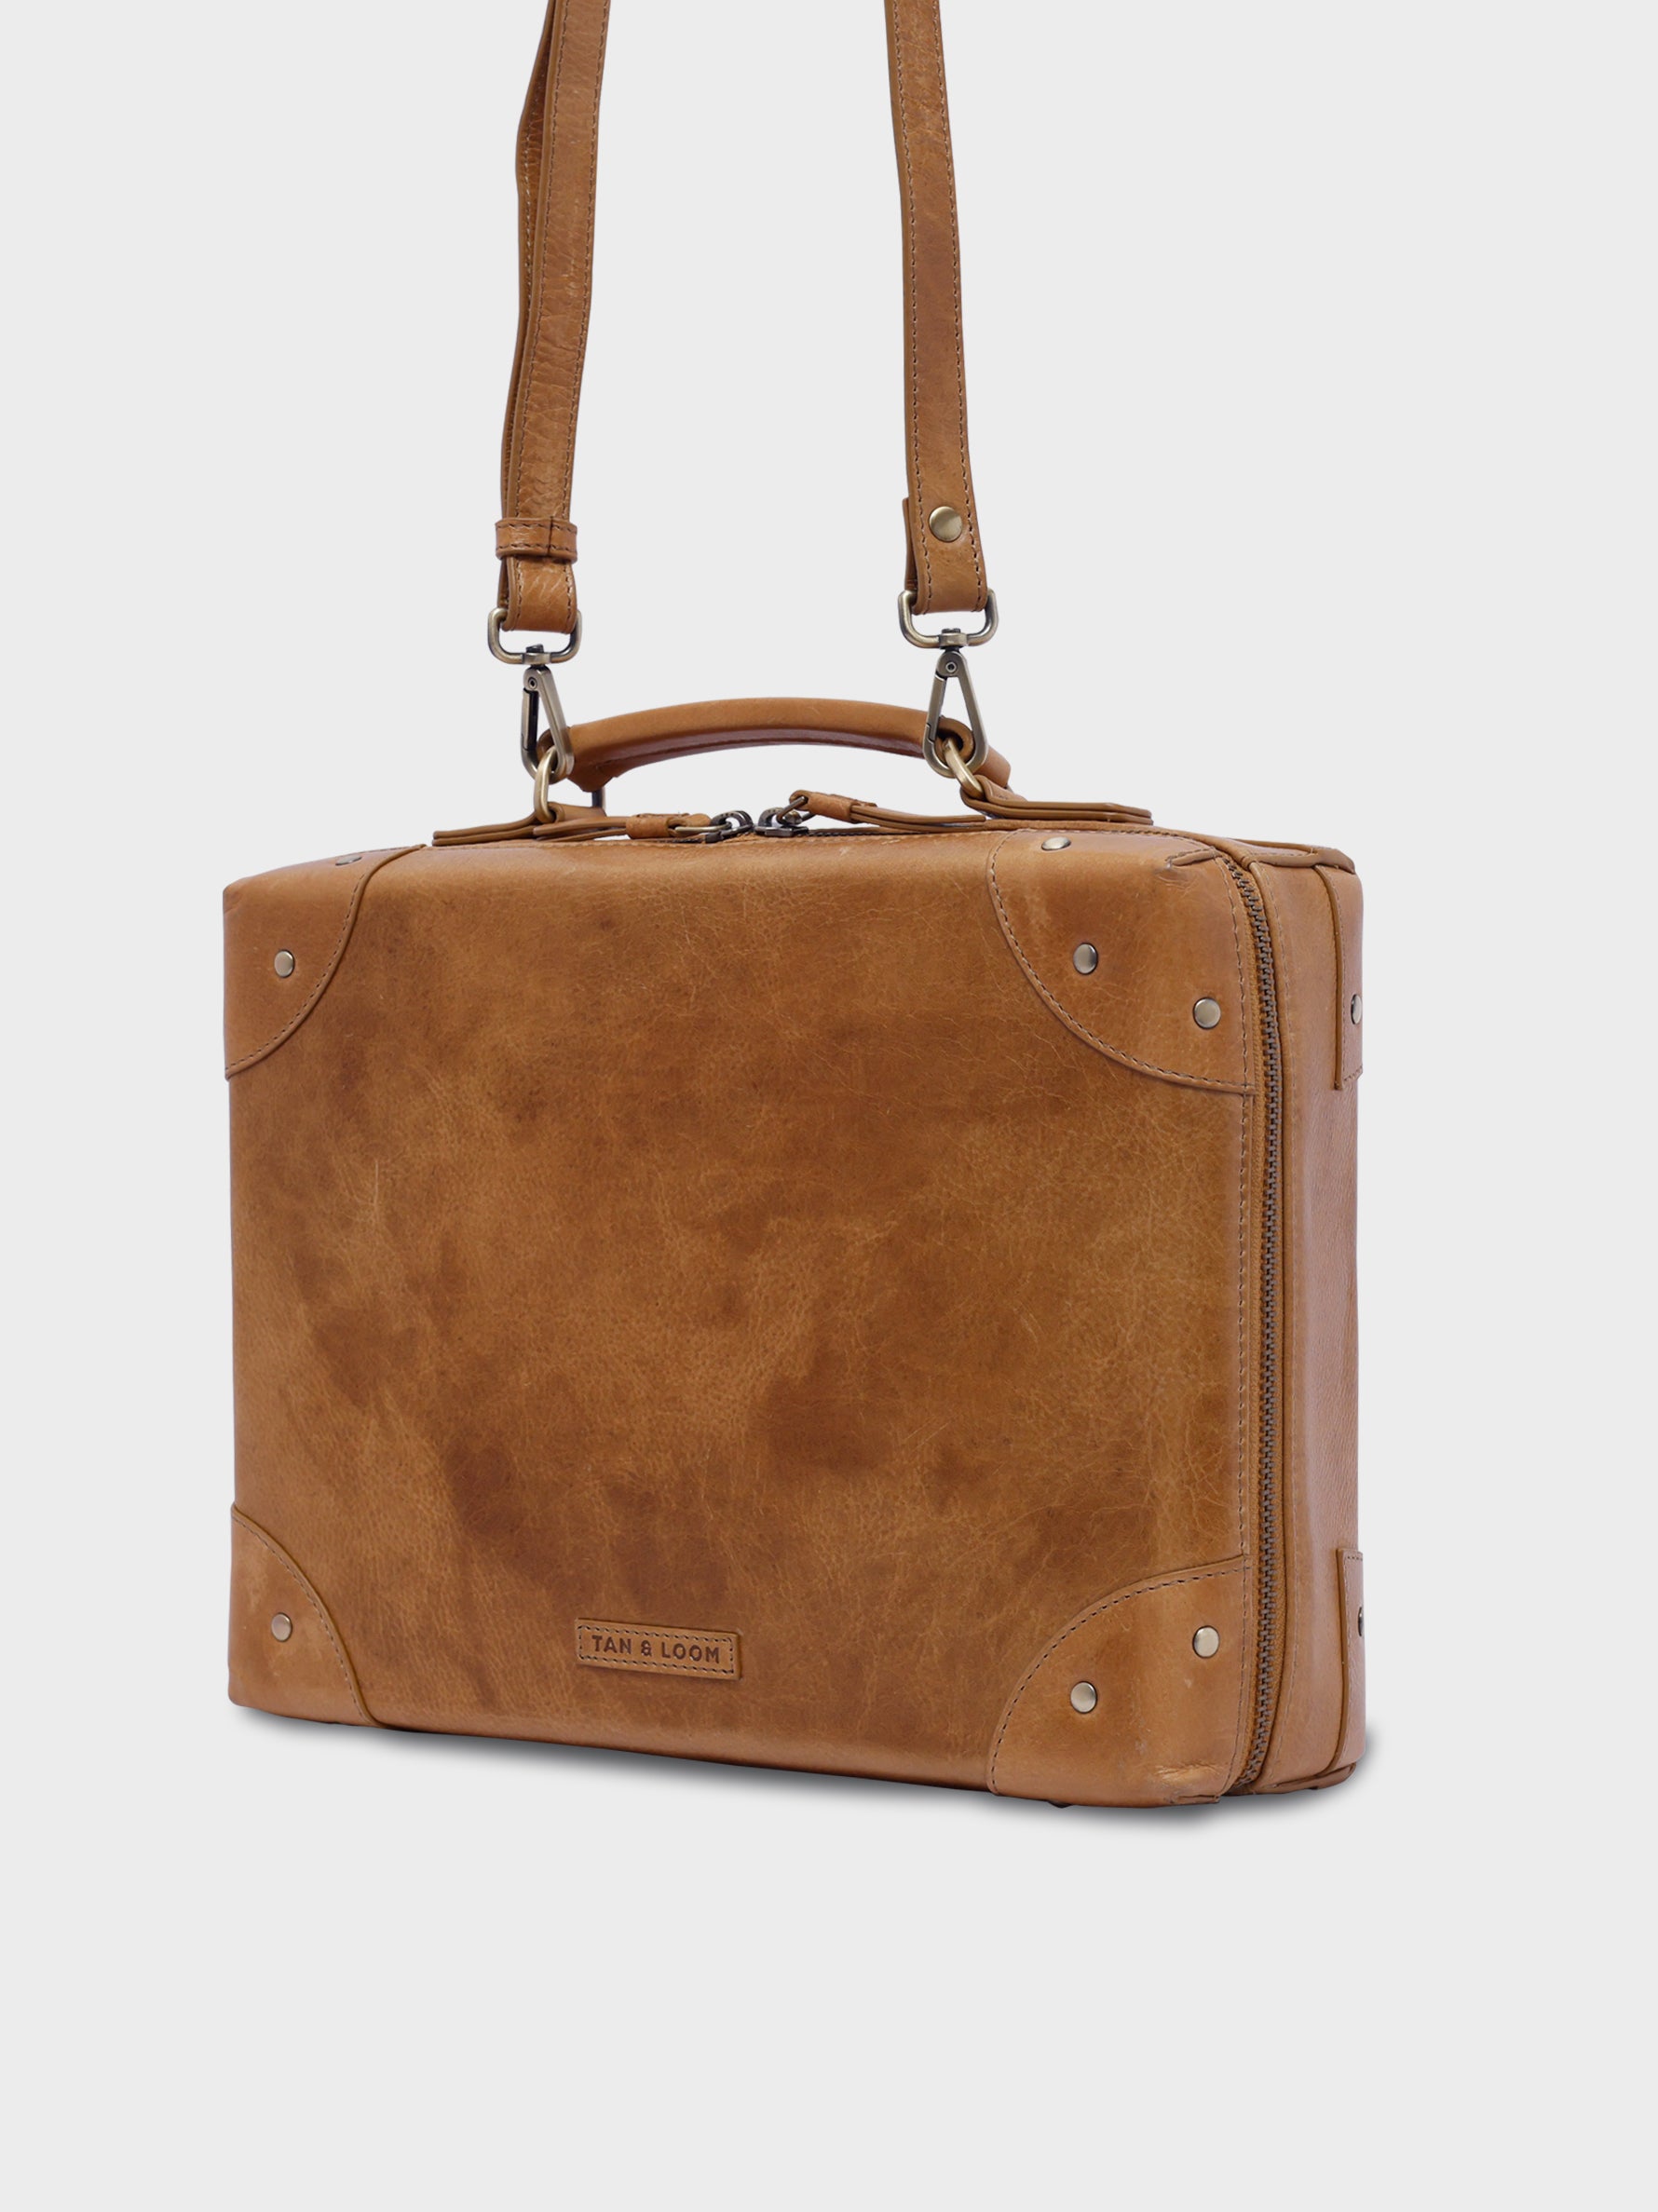 Handcrafted Genuine Vegetable Tanned Leather Traveller's Trunk Regular Sling Tuscany Tan for Women Tan & Loom